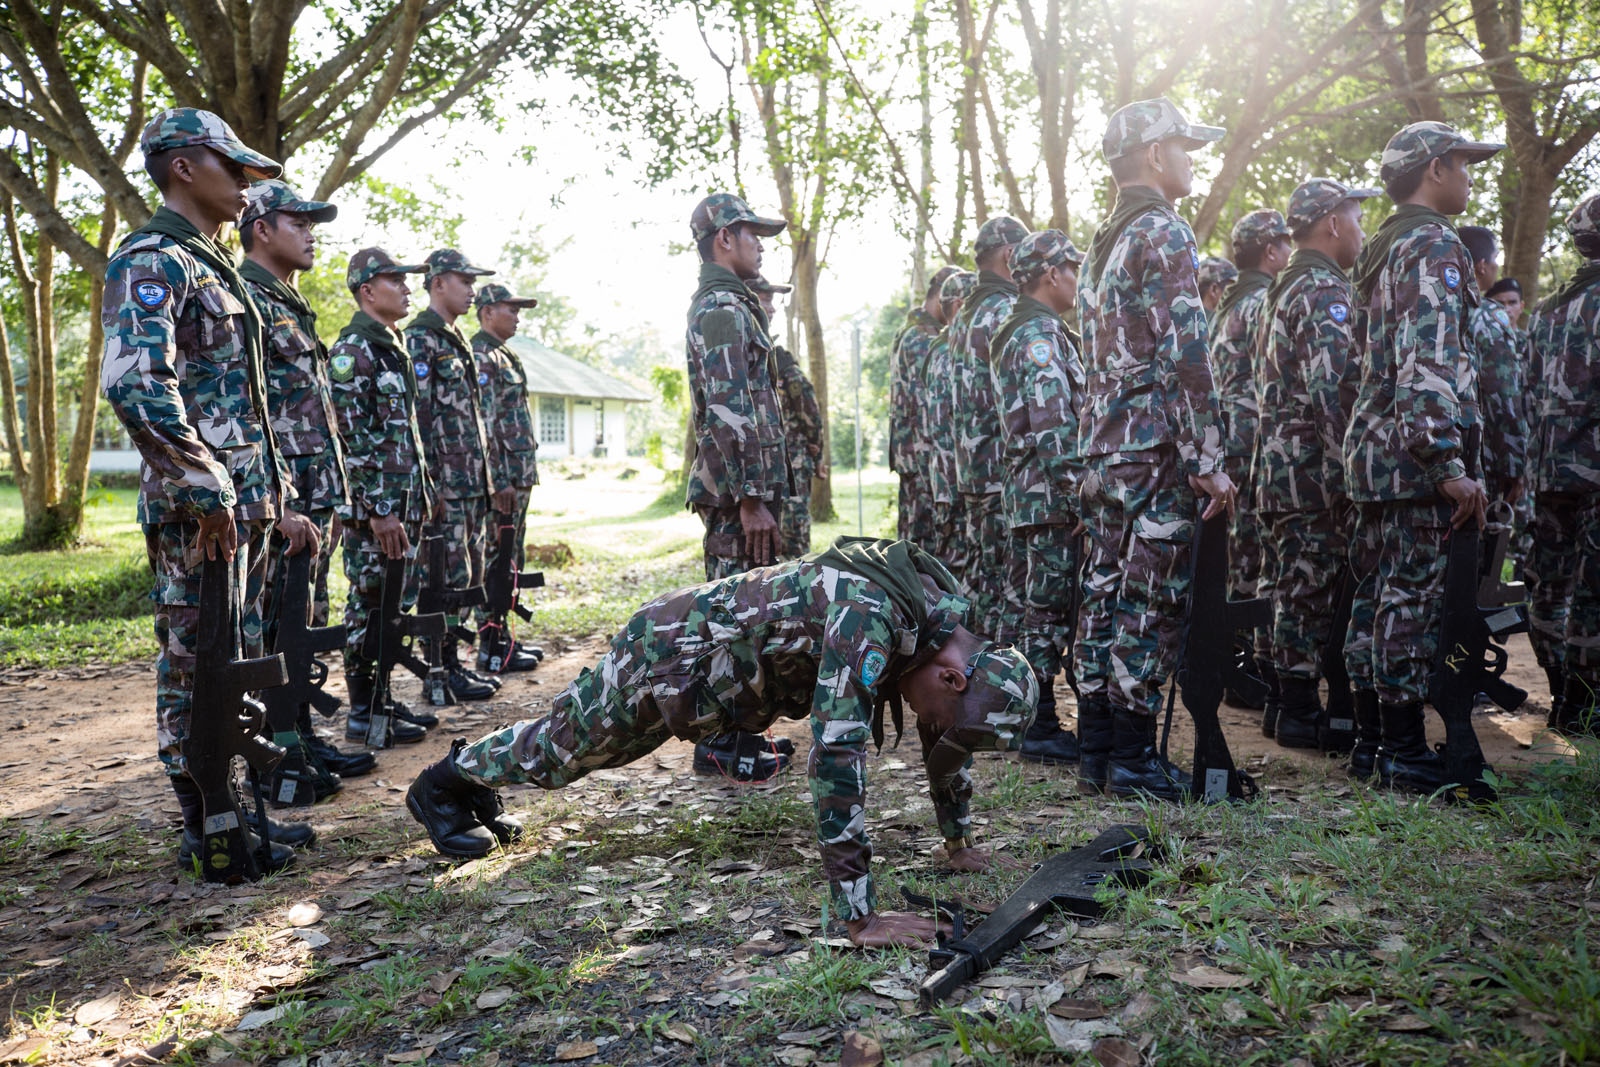 PROTECTING THAILANDS ROSEWOOD - New forest ranger recruits are ordered to do pushups...